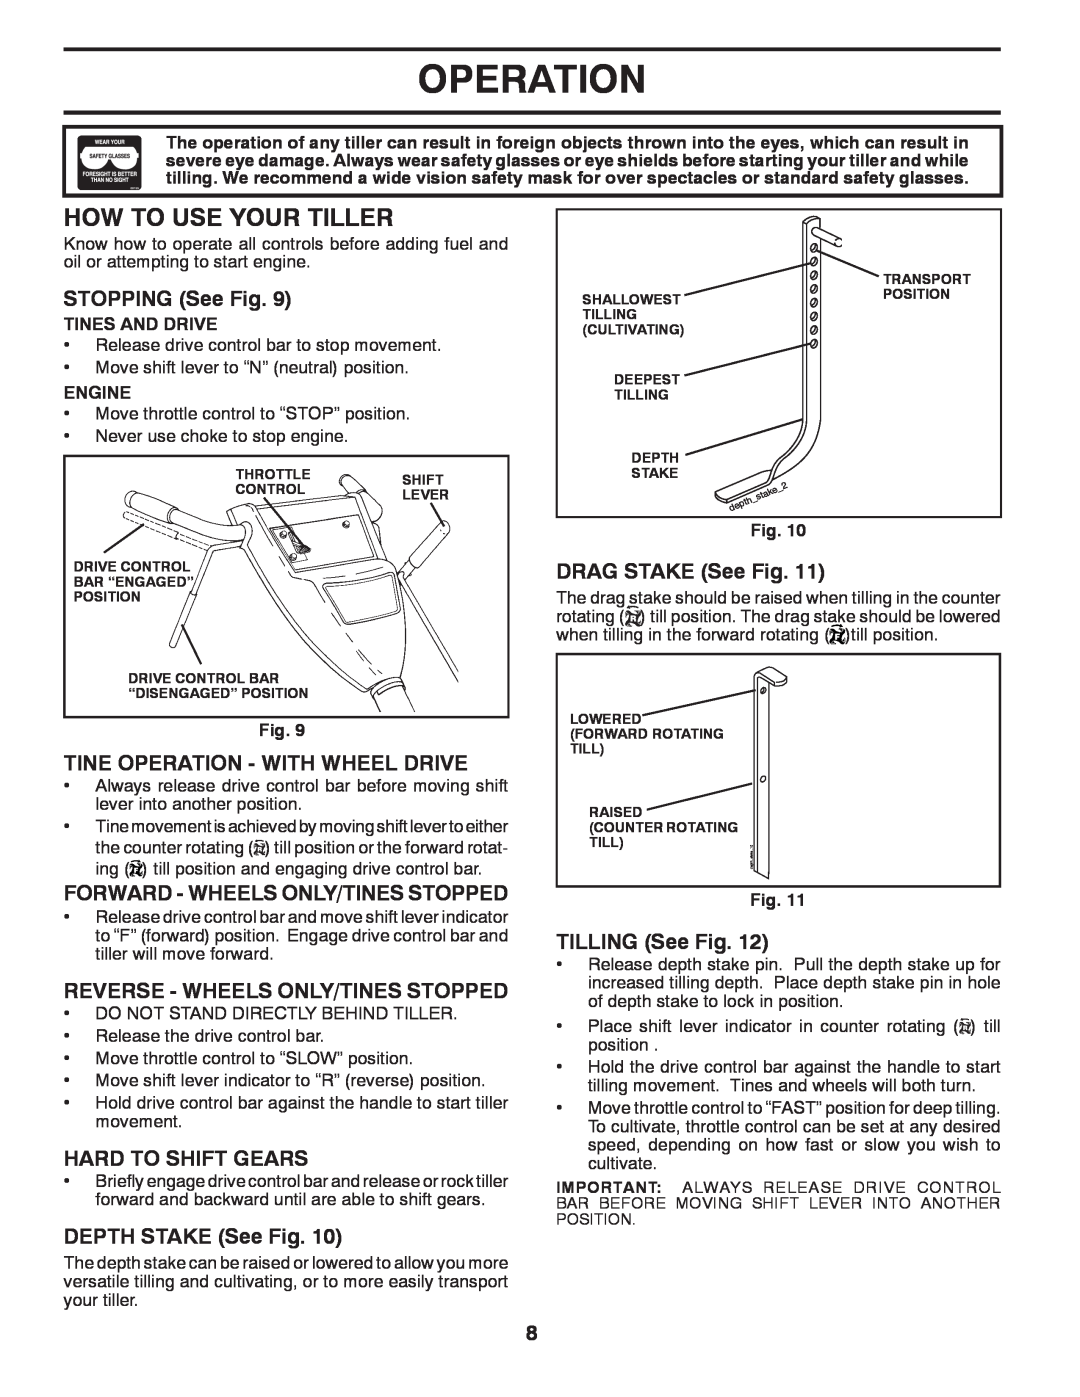 Poulan 96092002300 manual How To Use Your Tiller, STOPPING See Fig, Tine Operation - With Wheel Drive, Hard To Shift Gears 